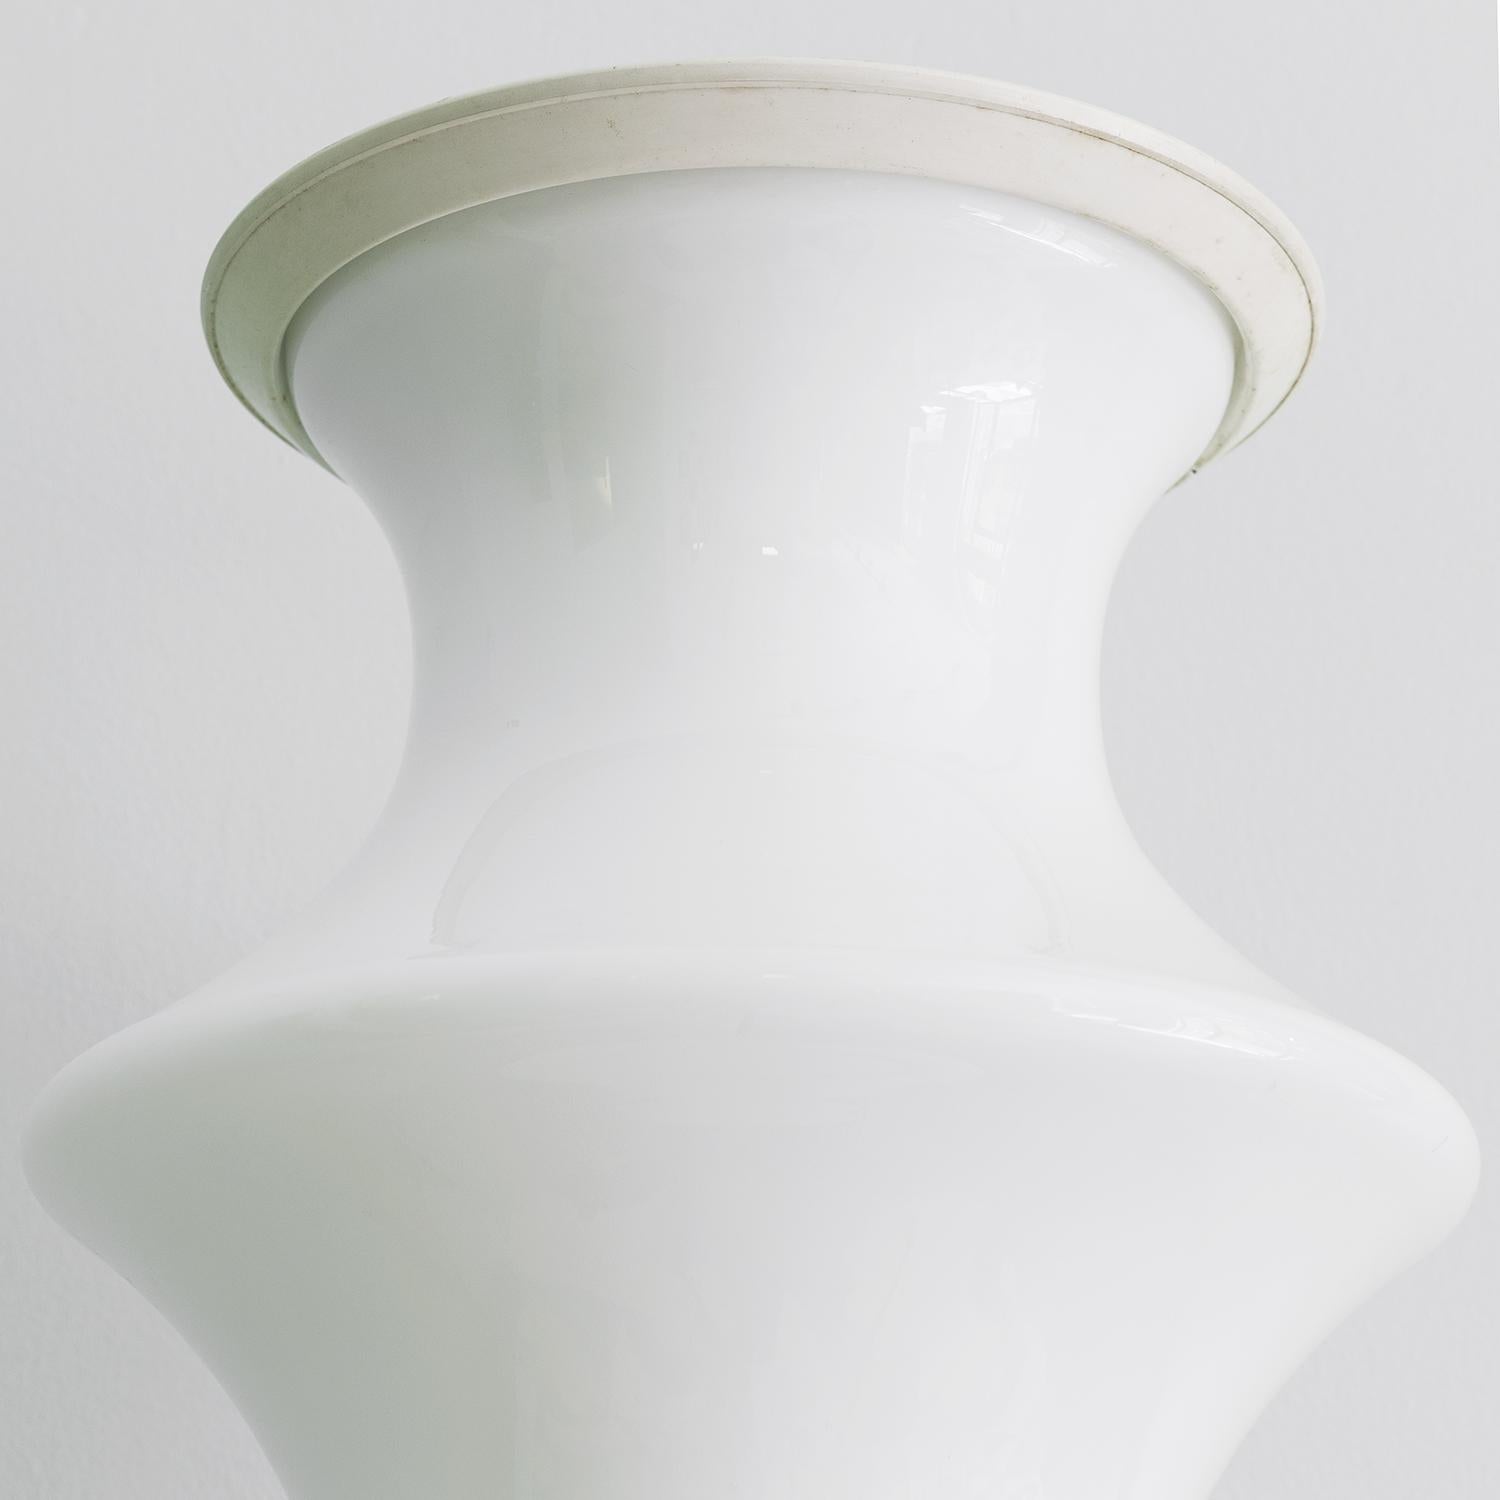 Original, white opaline glass floor lamp mod. Bambù, manufactured in the 1970s by Tronconi.